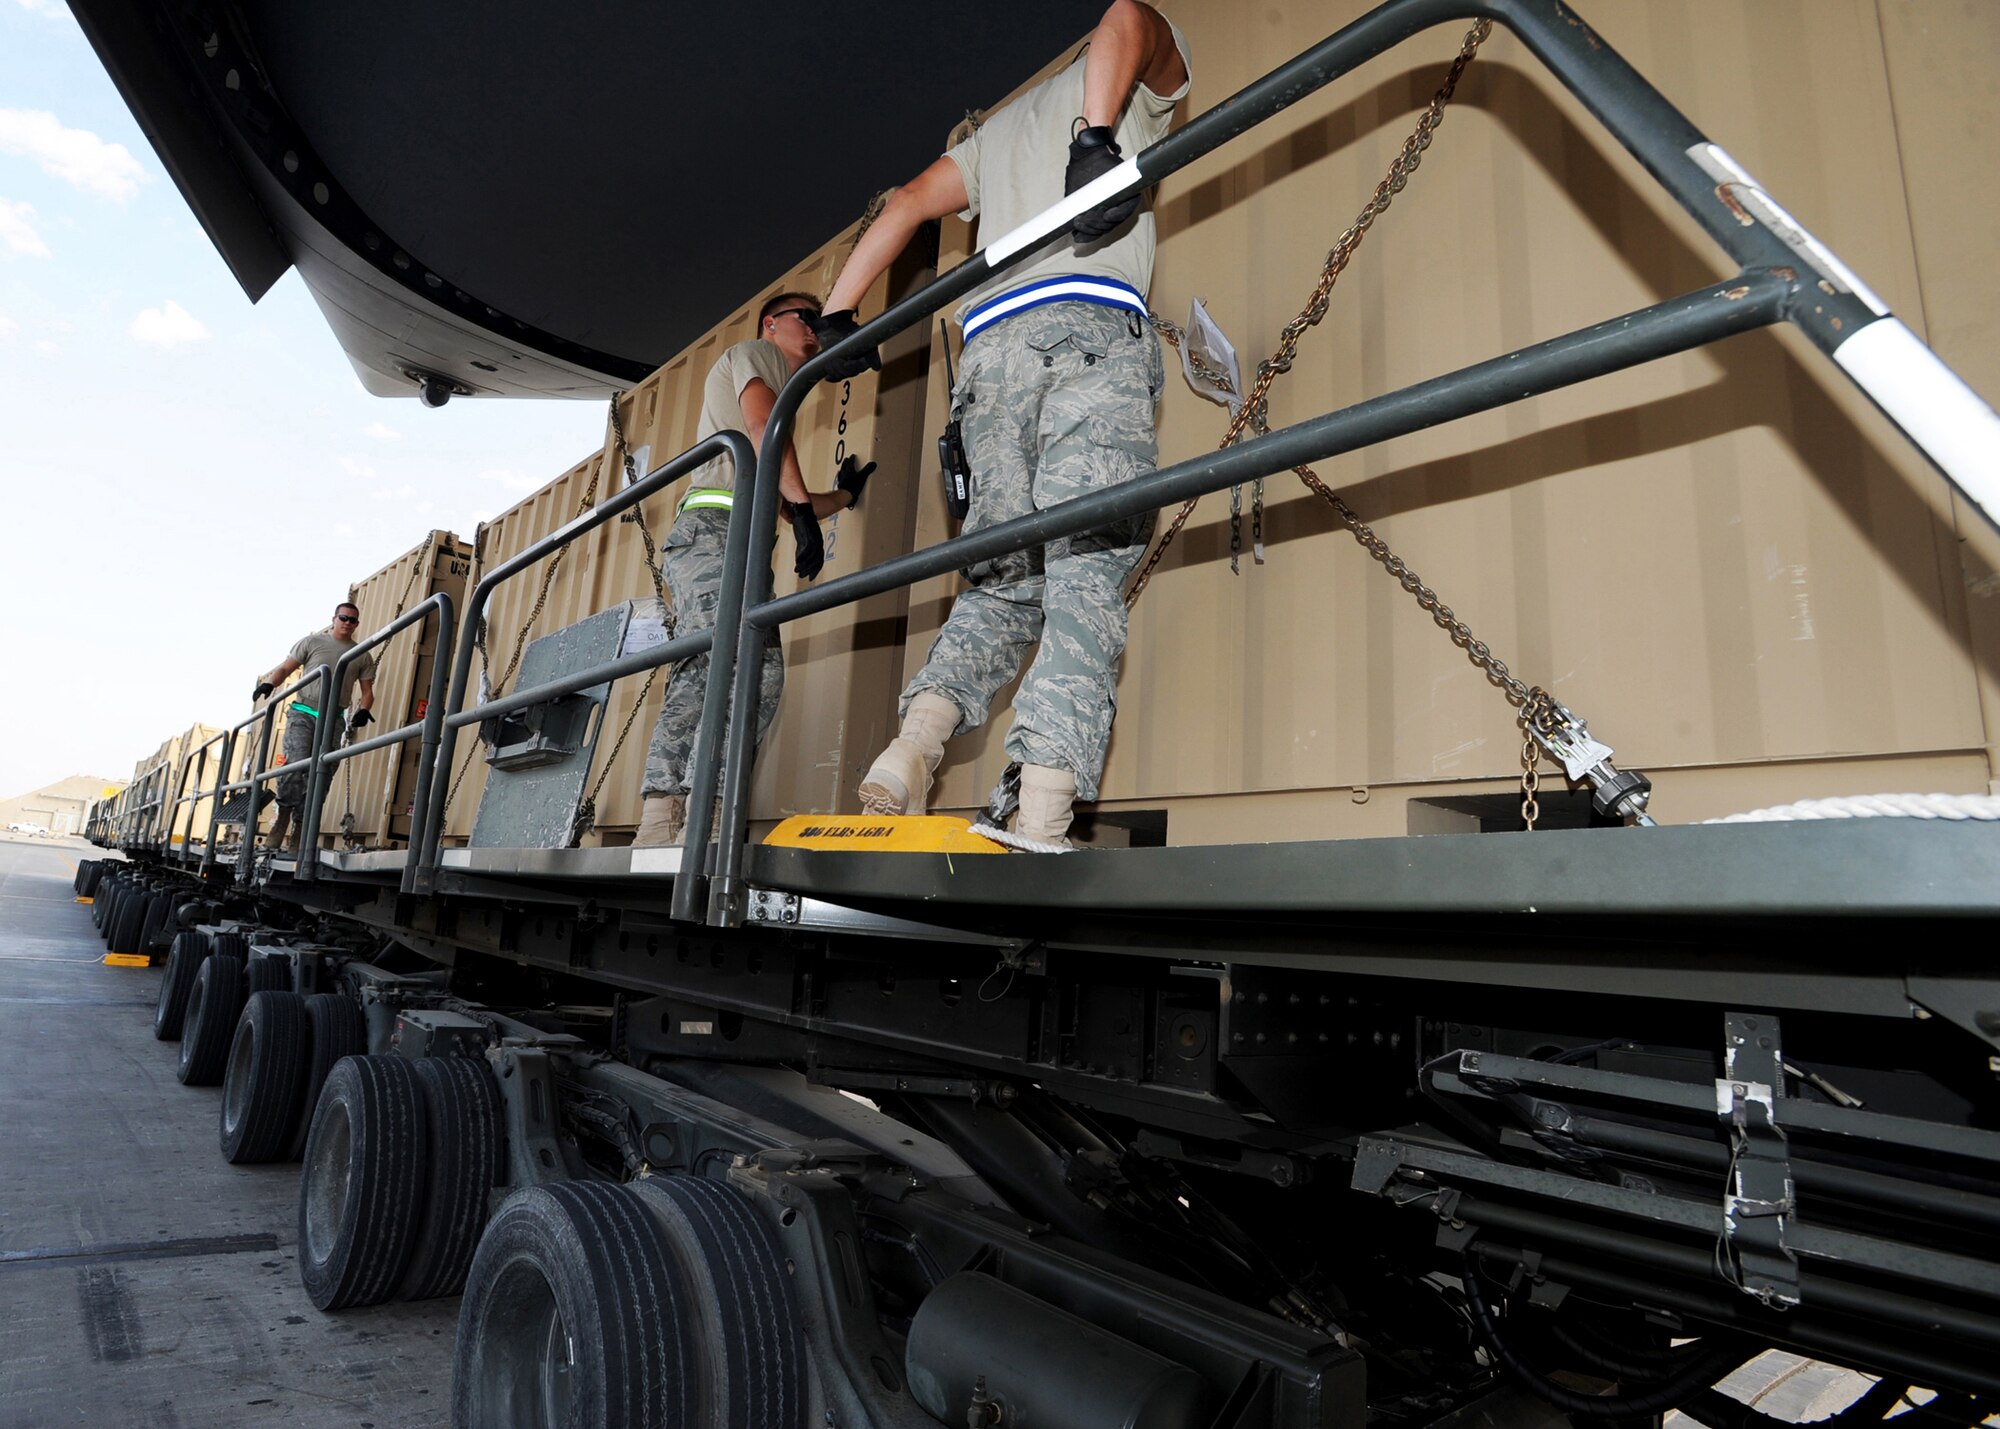 Aerial port Airmen from the 386th Expeditionary Logistics Readiness Squadron prepare to push pallets of cargo off a K-loader onto a waiting C-17 Globemaster III Nov. 3, 2010, at an air base in Southwest Asia.  A K-loader is a specialized flat-bed truck designed to carry pallets of cargo from a marshalling yard to waiting aircraft. The K-loader's bed can be raised, lowered or pitched in different directions so that it mates perfectly with the cargo bay of any airlifter. The bed also is fitted with a roller system that allows Airmen to push pallets weighing up to 7,000 pounds off the truck and onto aircraft with ease. (U.S. Air Force photo/Senior Airman Laura Turner)